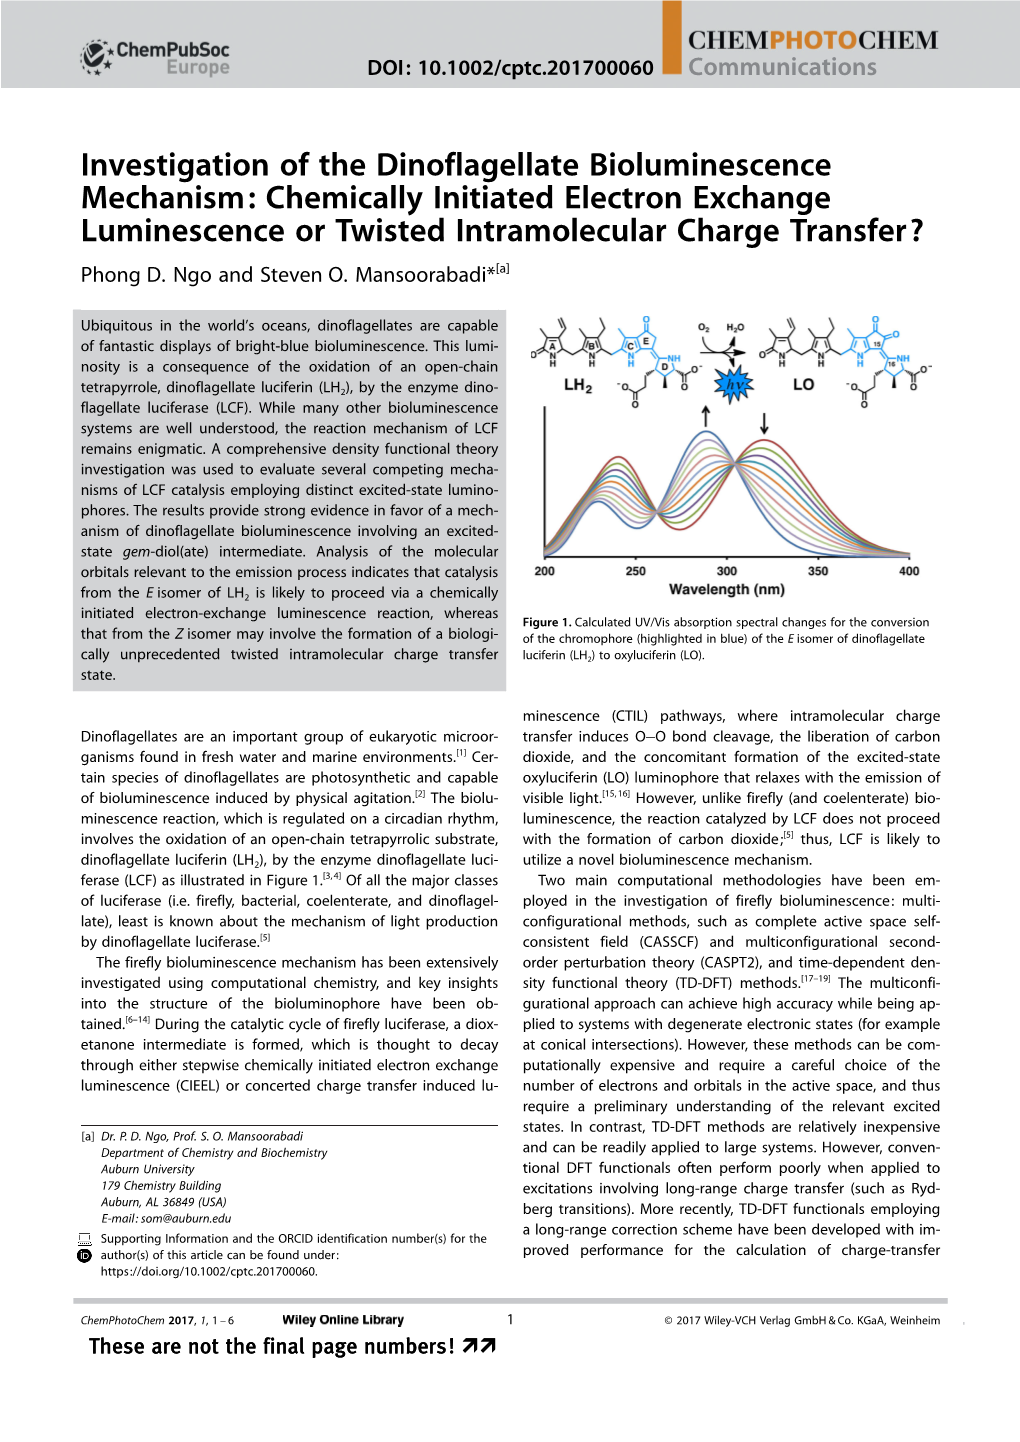 Investigation of the Dinoflagellate Bioluminescence Mechanism: Chemically Initiated Electron Exchange Luminescence Or Twisted Intramolecular Charge Transfer? Phong D